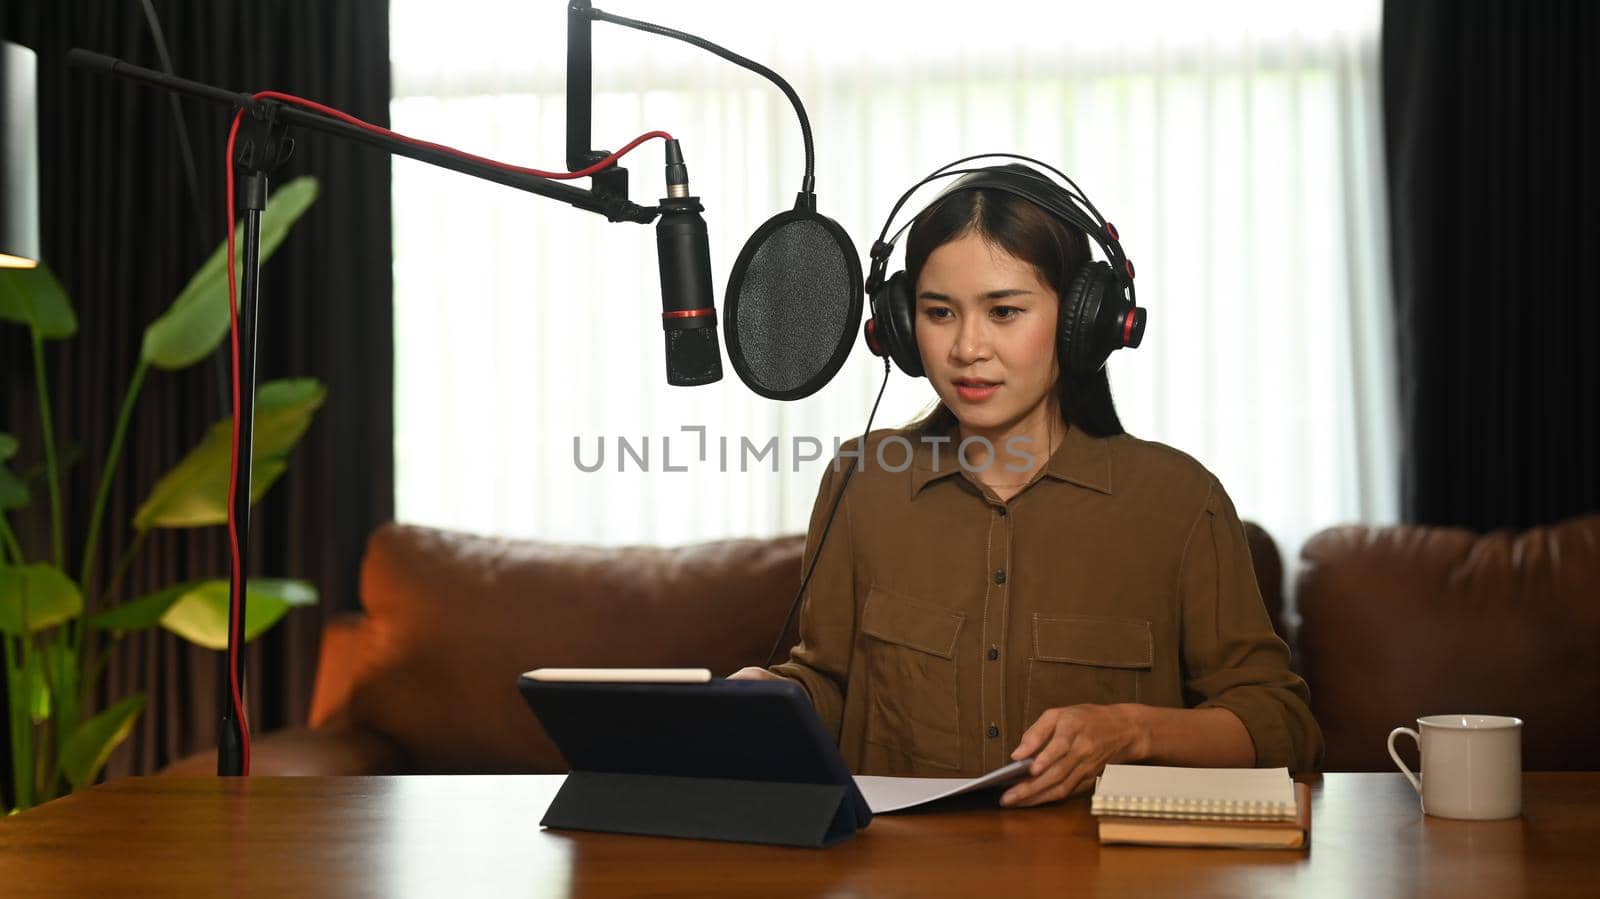 Attractive woman using laptop and microphone streaming audio podcast at home studio. Communication and technology concept.